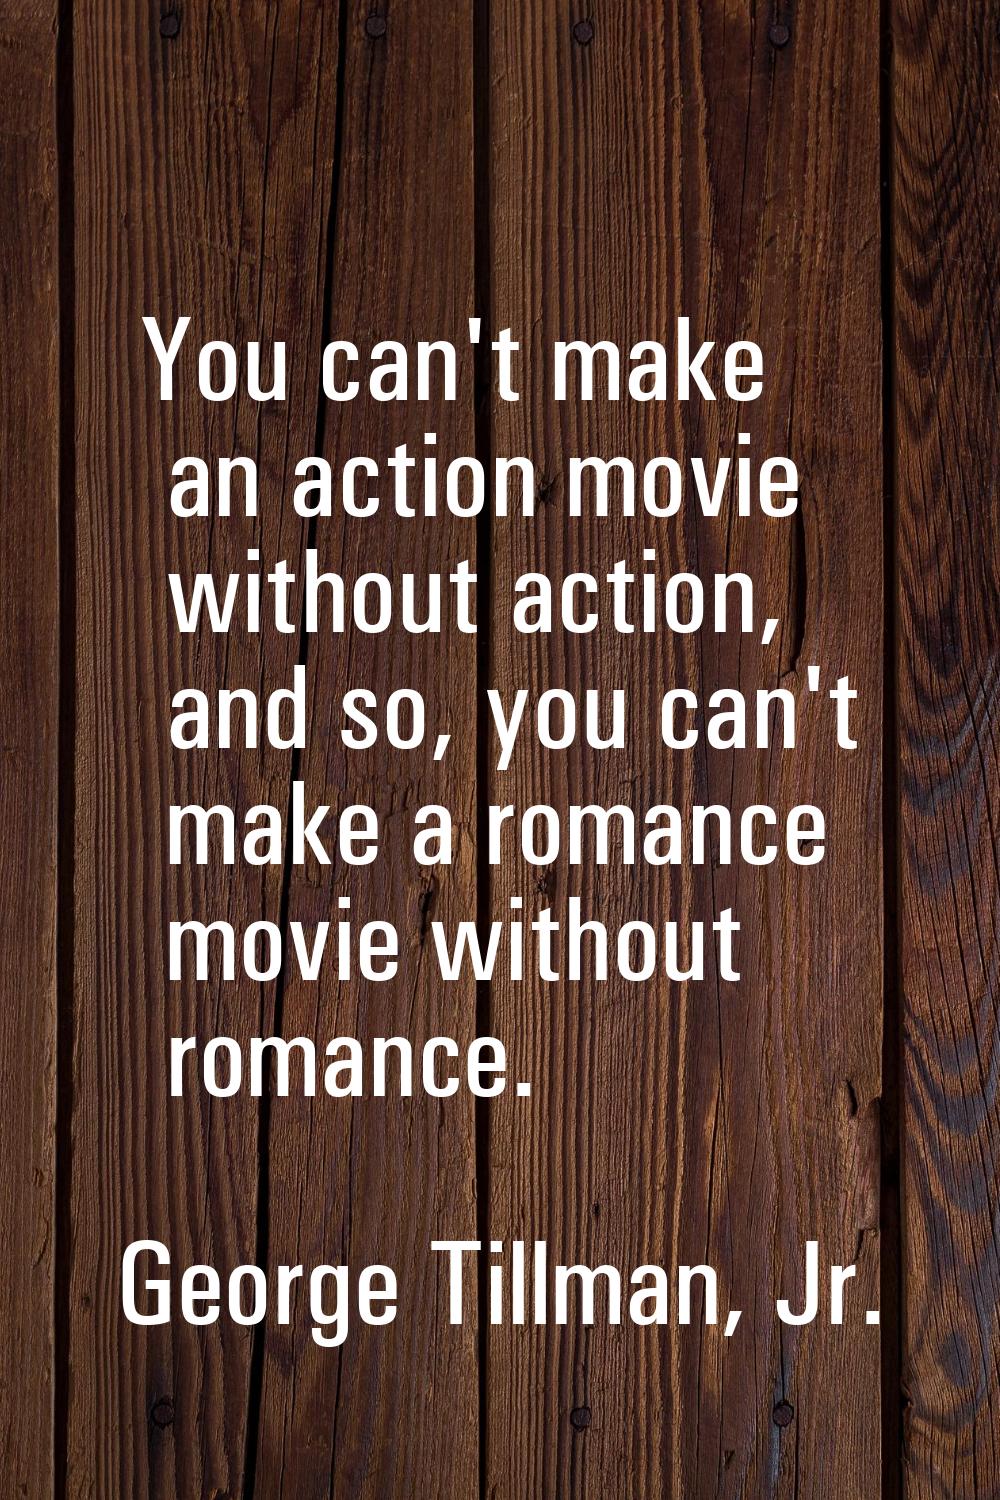 You can't make an action movie without action, and so, you can't make a romance movie without roman